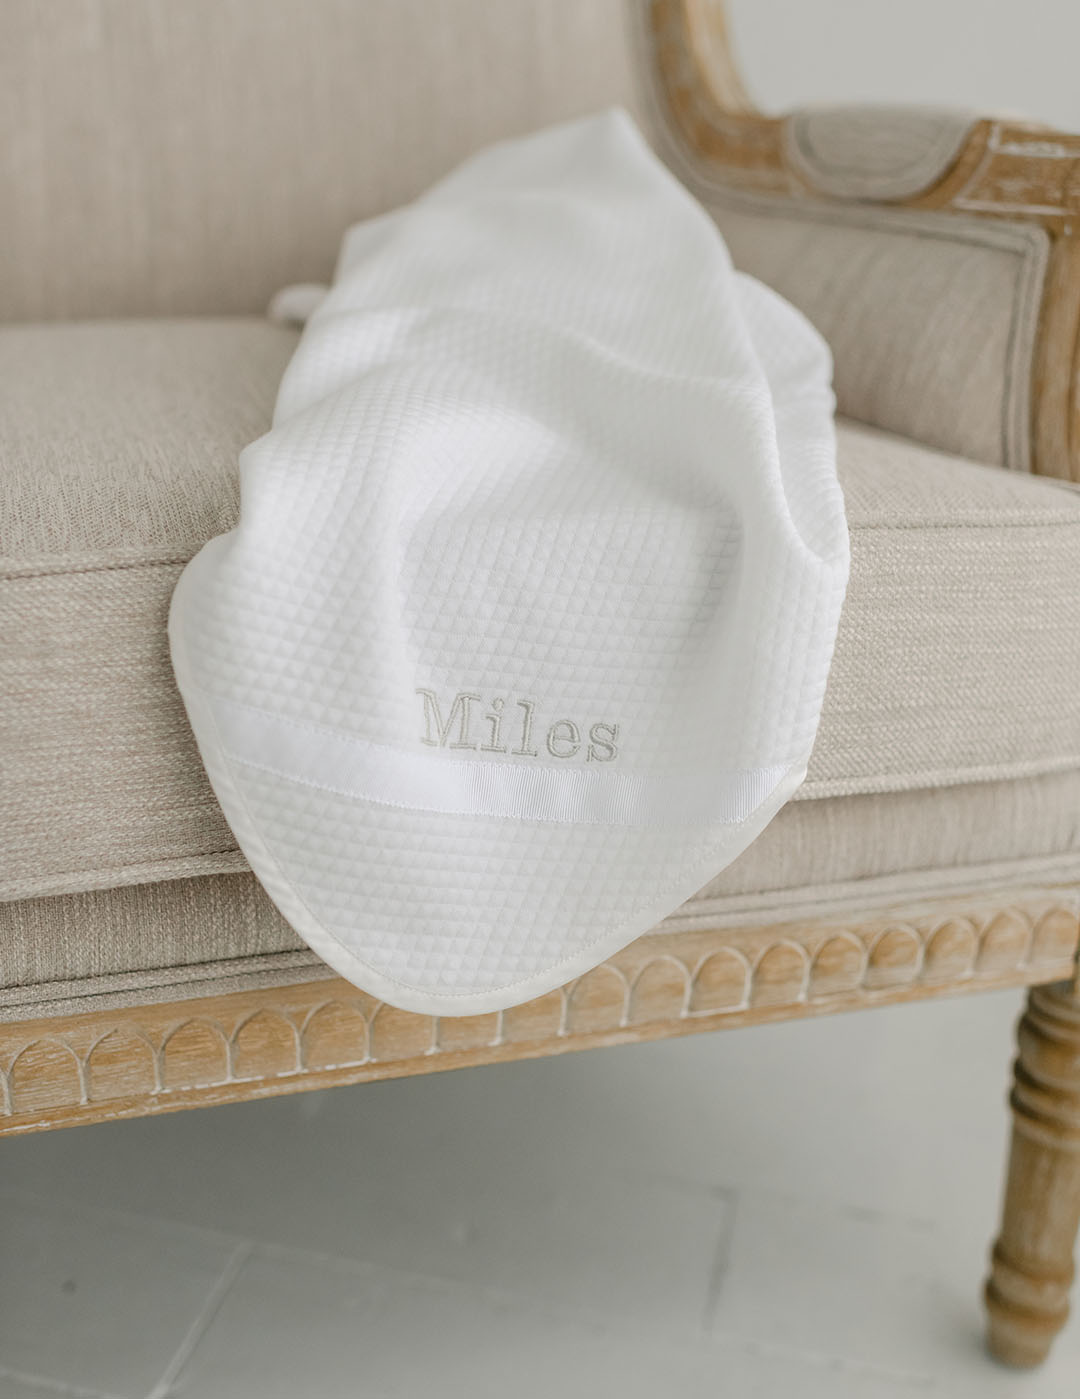 Flat lay photo of the Miles Personalized Blanket on a chair. It is made with quilted cotton and a ribbon detail on the corner. The name "Miles" is embroidered on the corner.